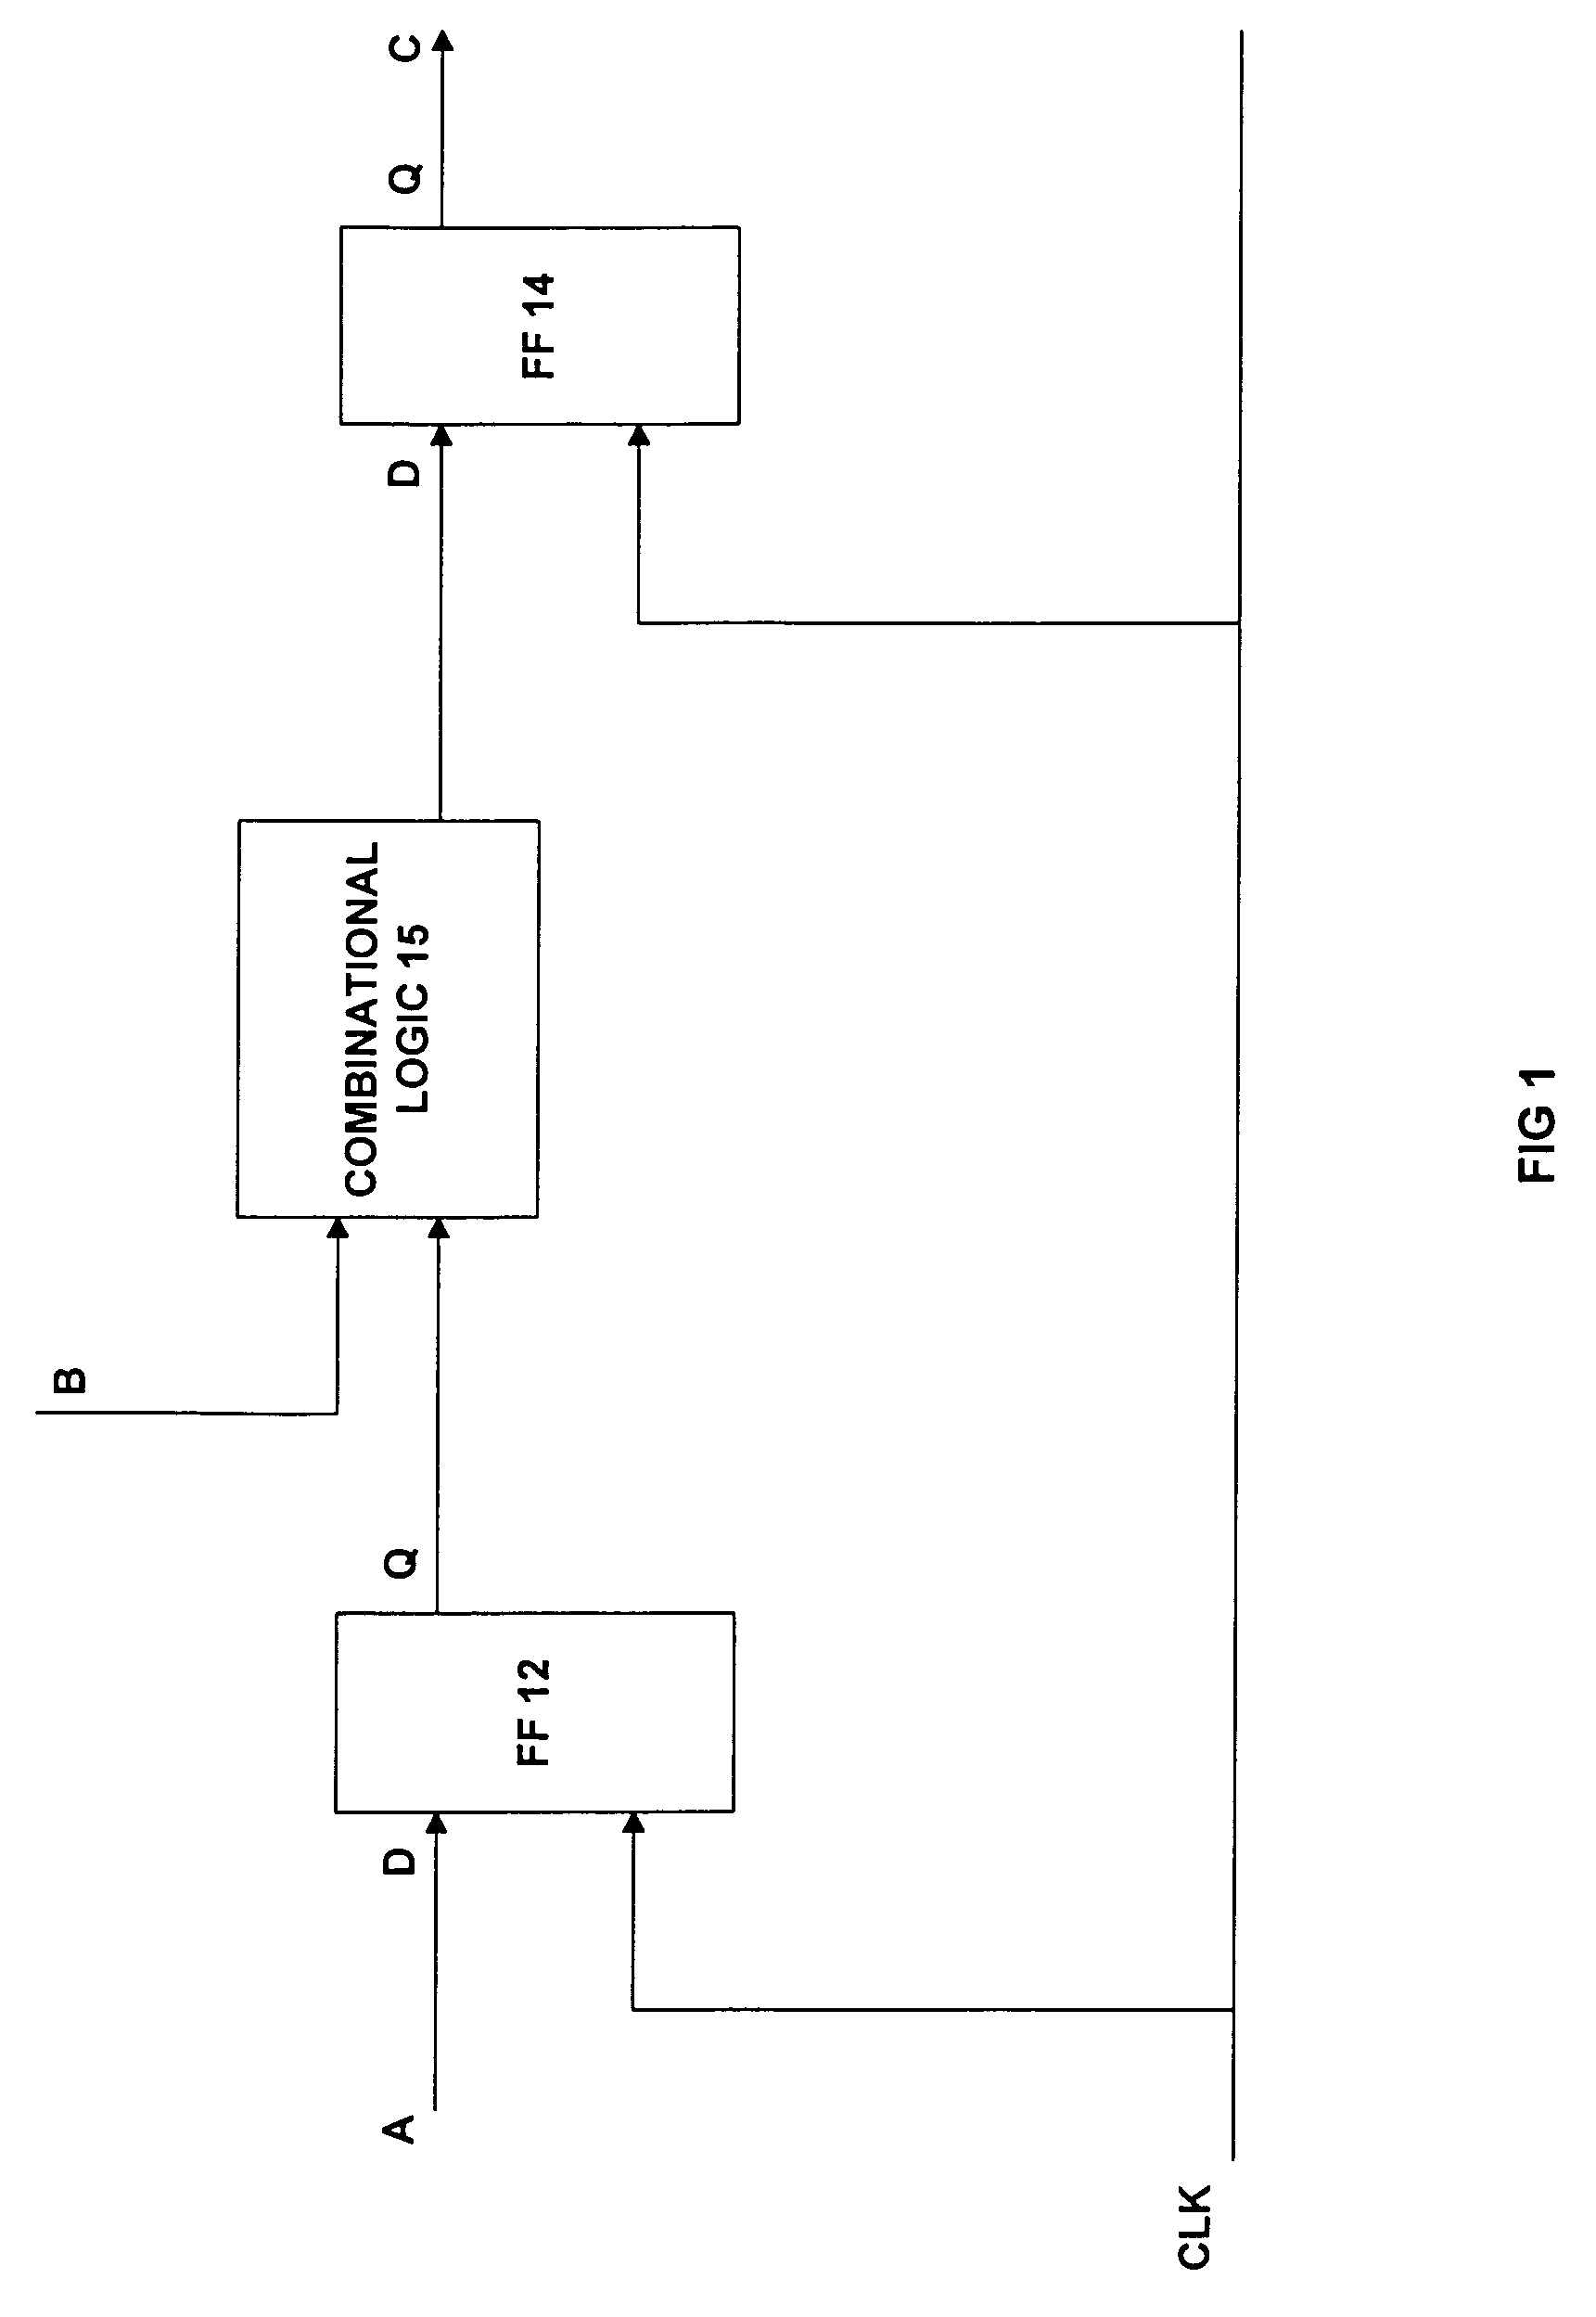 Semiconductor device and method and apparatus for testing such a device